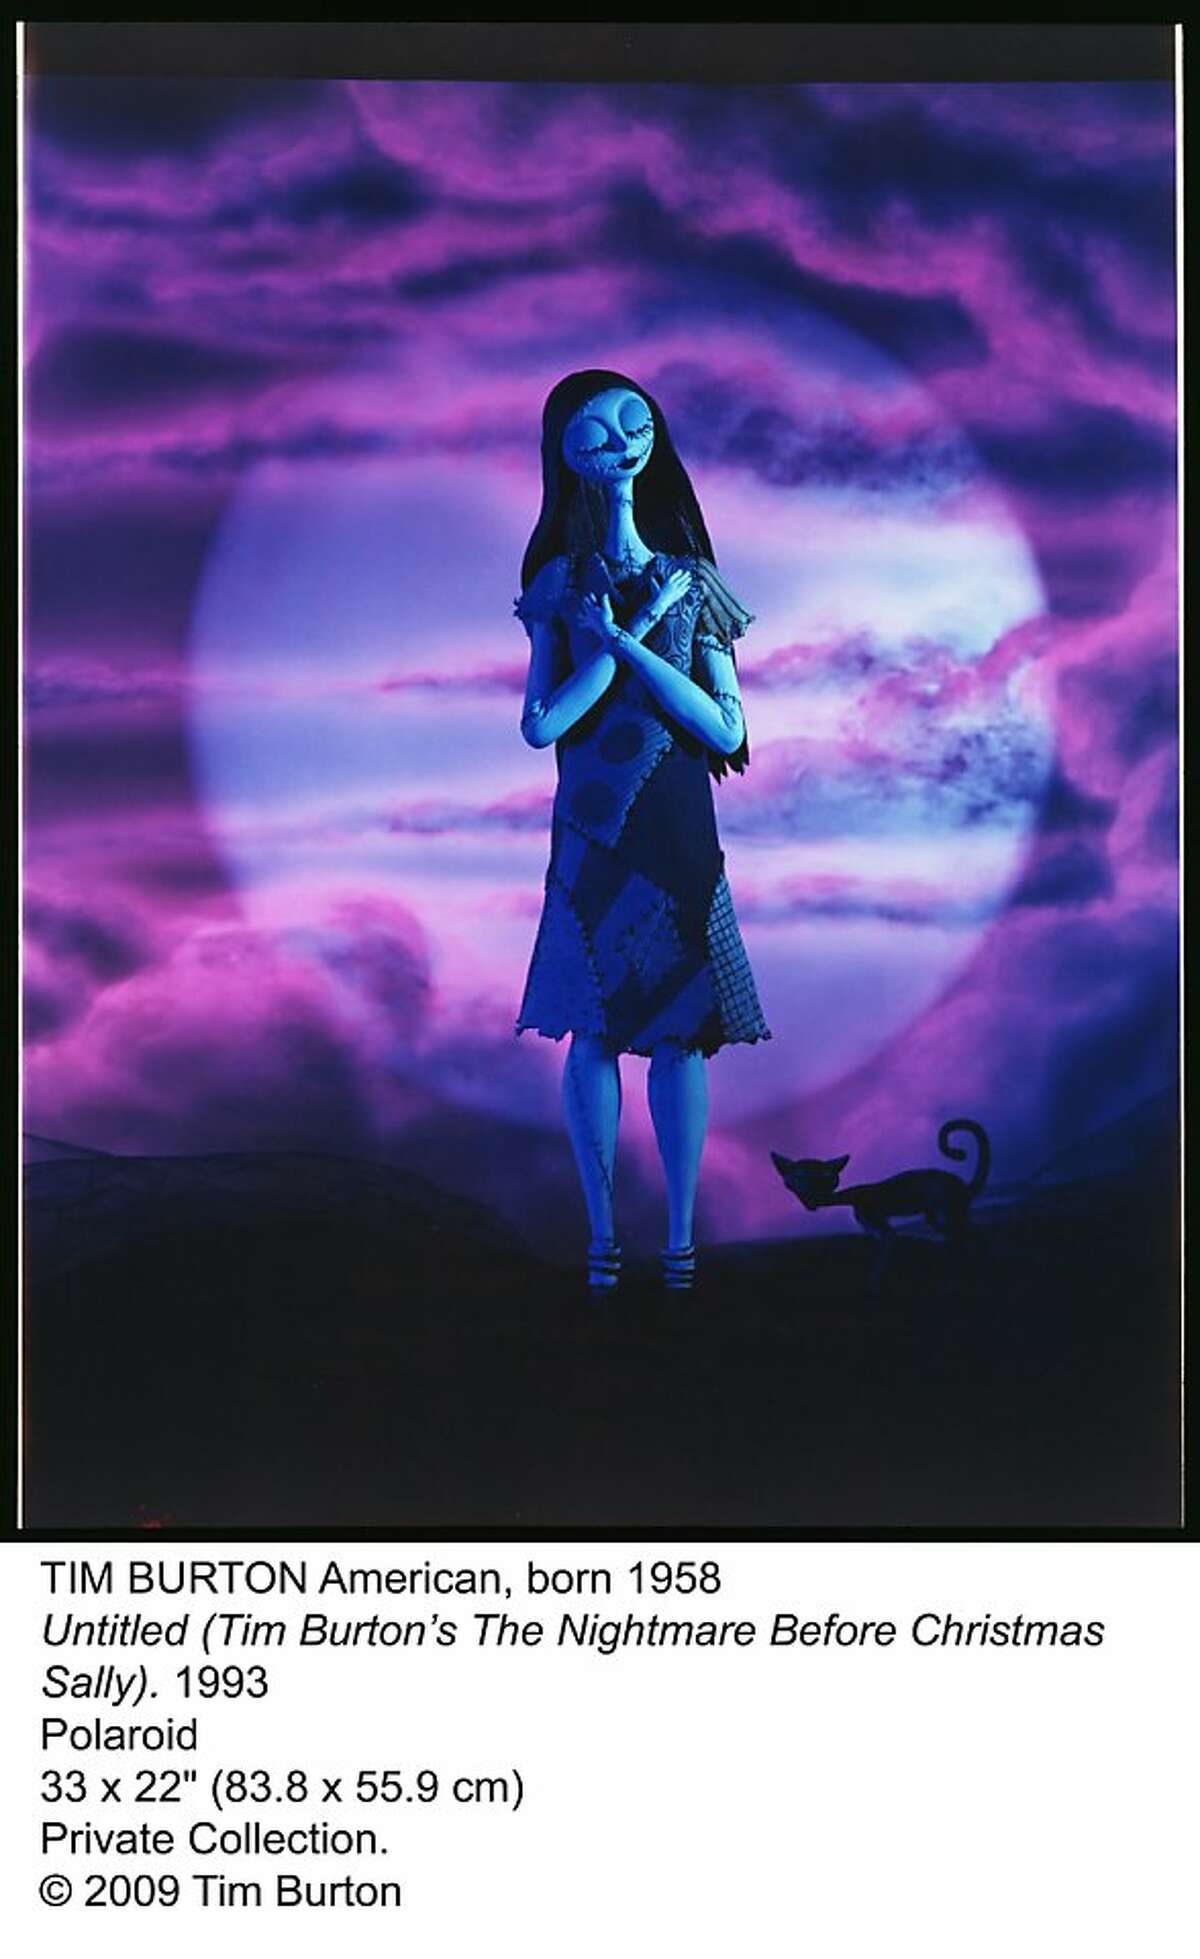 Tim Burton's portrait of the character Sally from the Nightmare Before Christmas on display with other works by the artist/filmmaker at the Los Angeles County Museum of Art through Oct. 31, 2011.